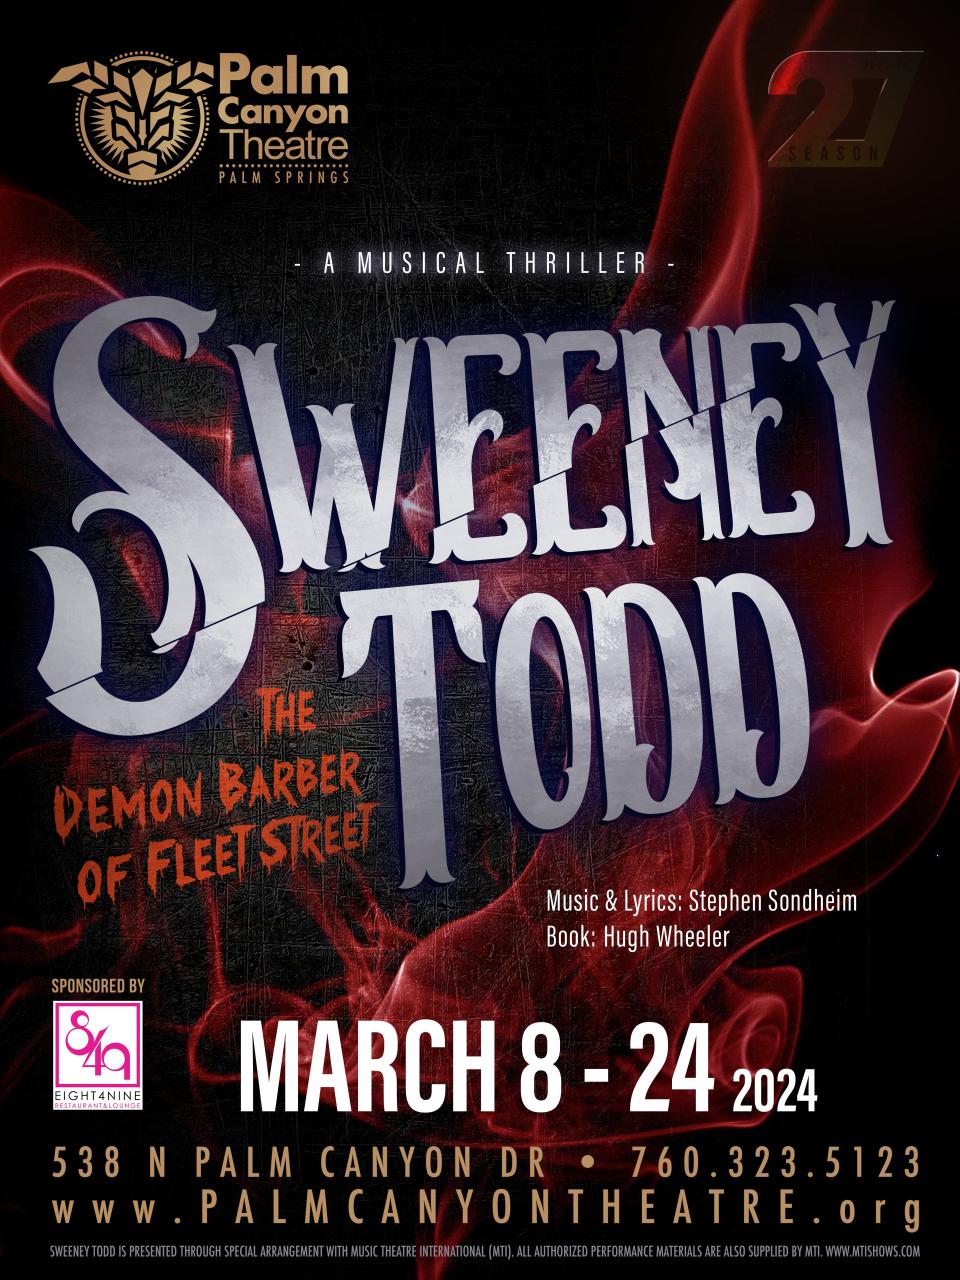 Palm Canyon Theatre presents "Sweeney Todd: The Demon Barber of Fleet Street" March 8-24 in Palm Springs, Calif.